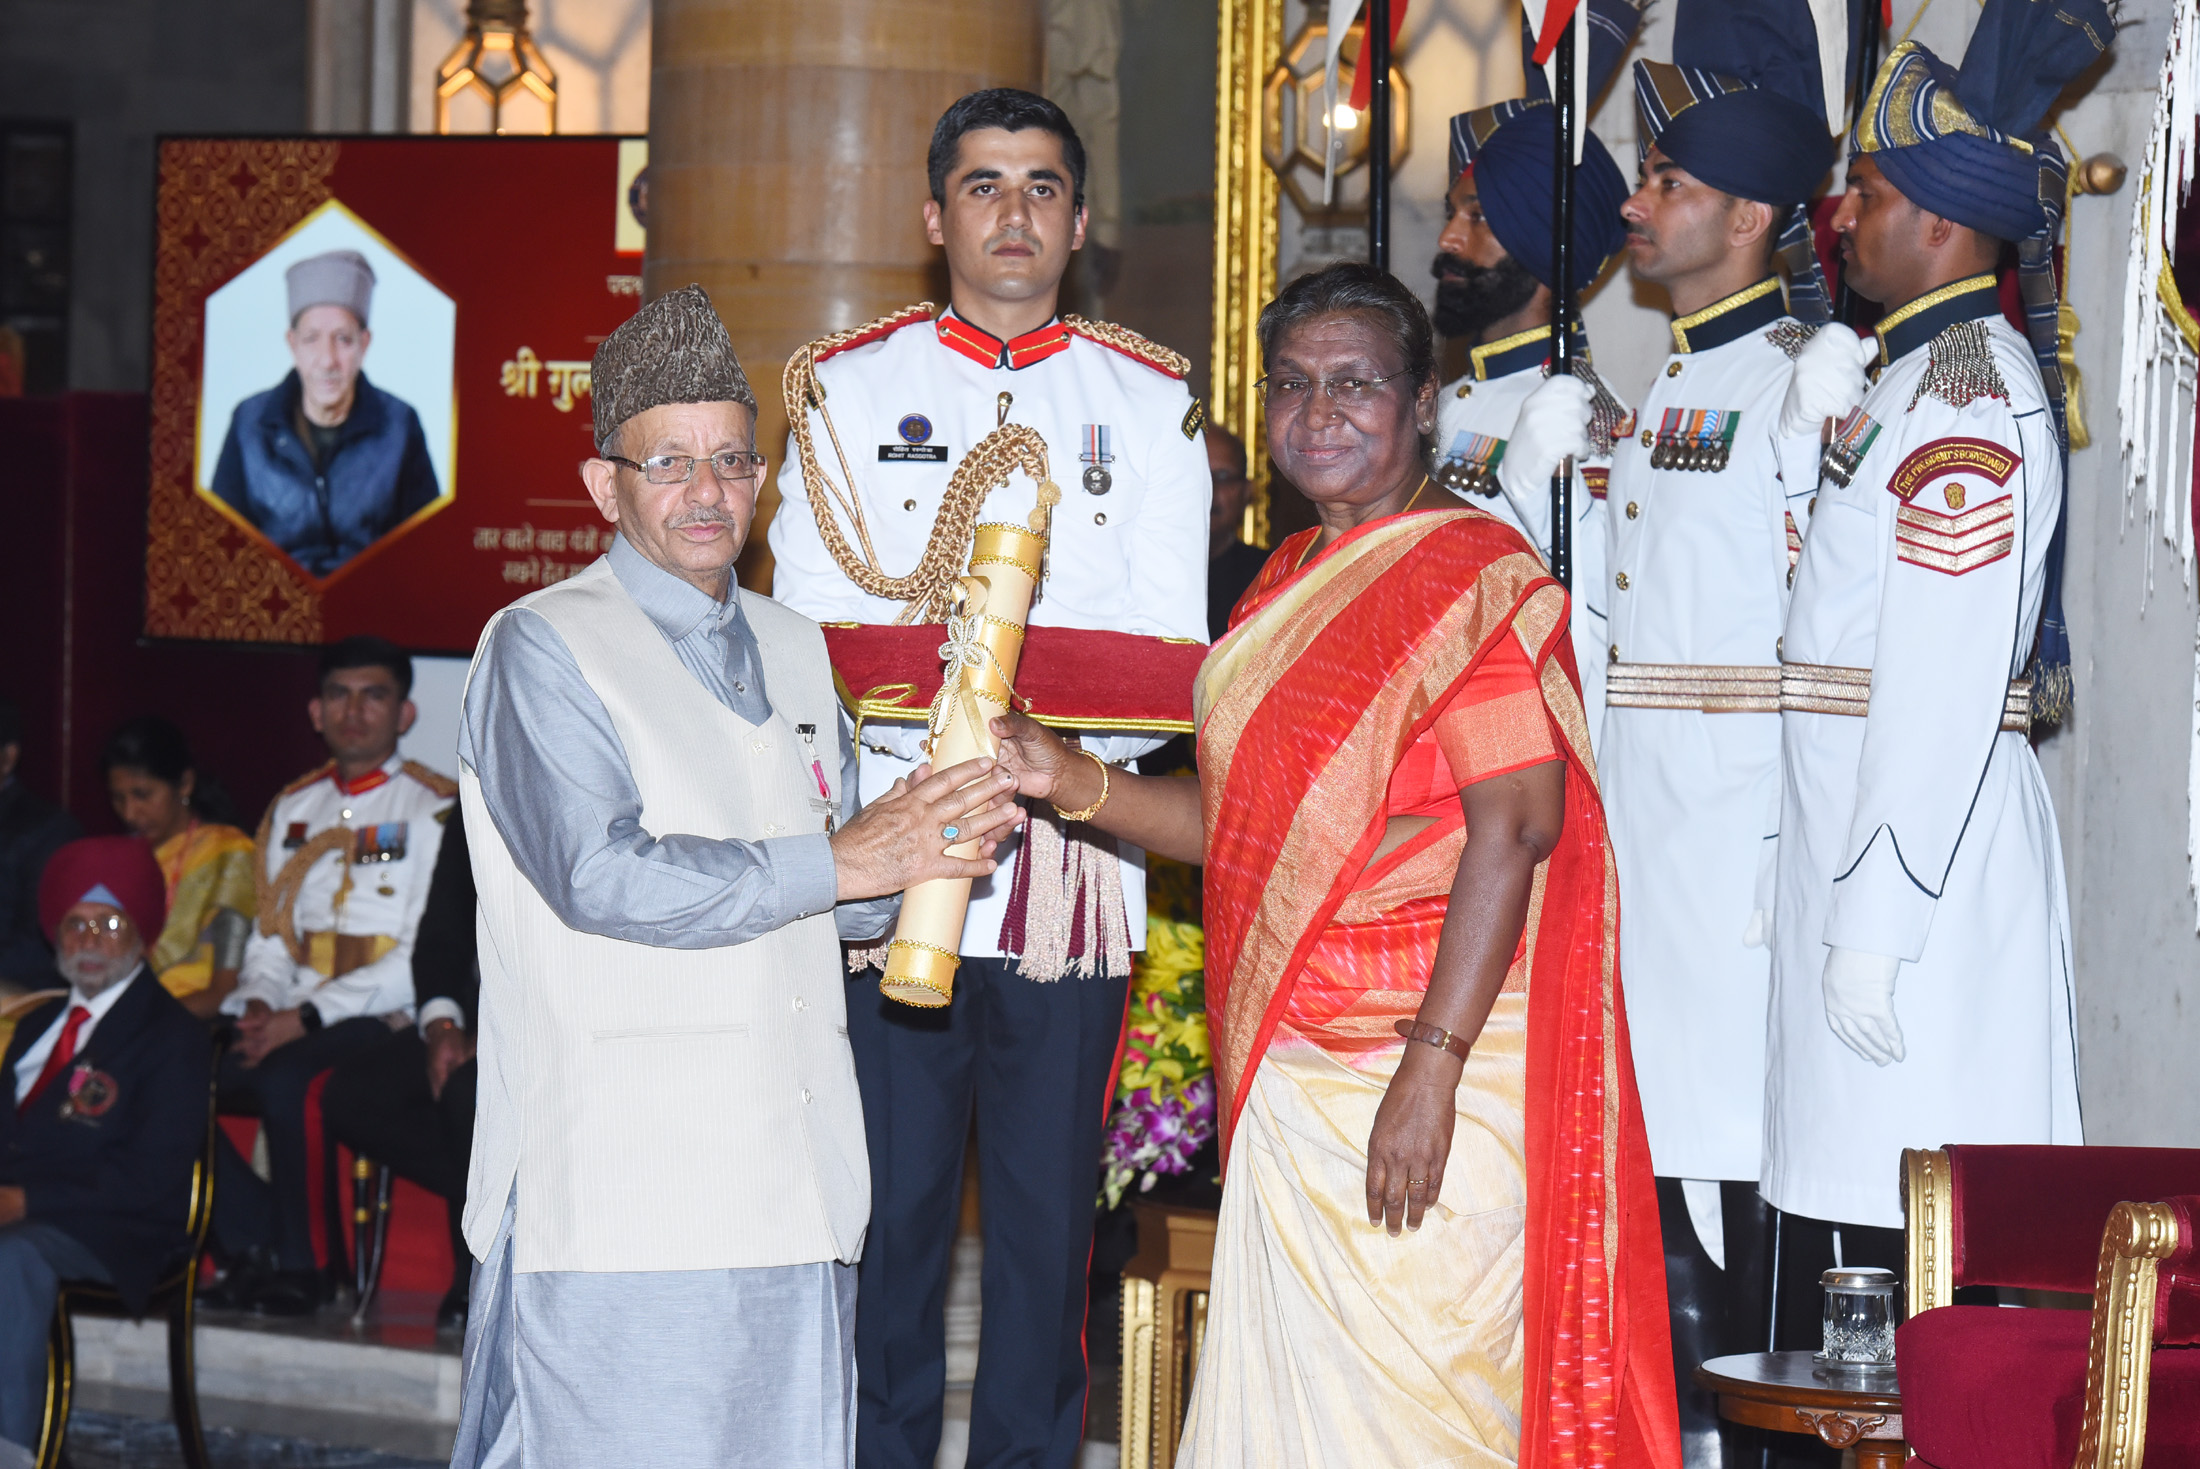 The Padma Awards 2023 were presented by the President of India